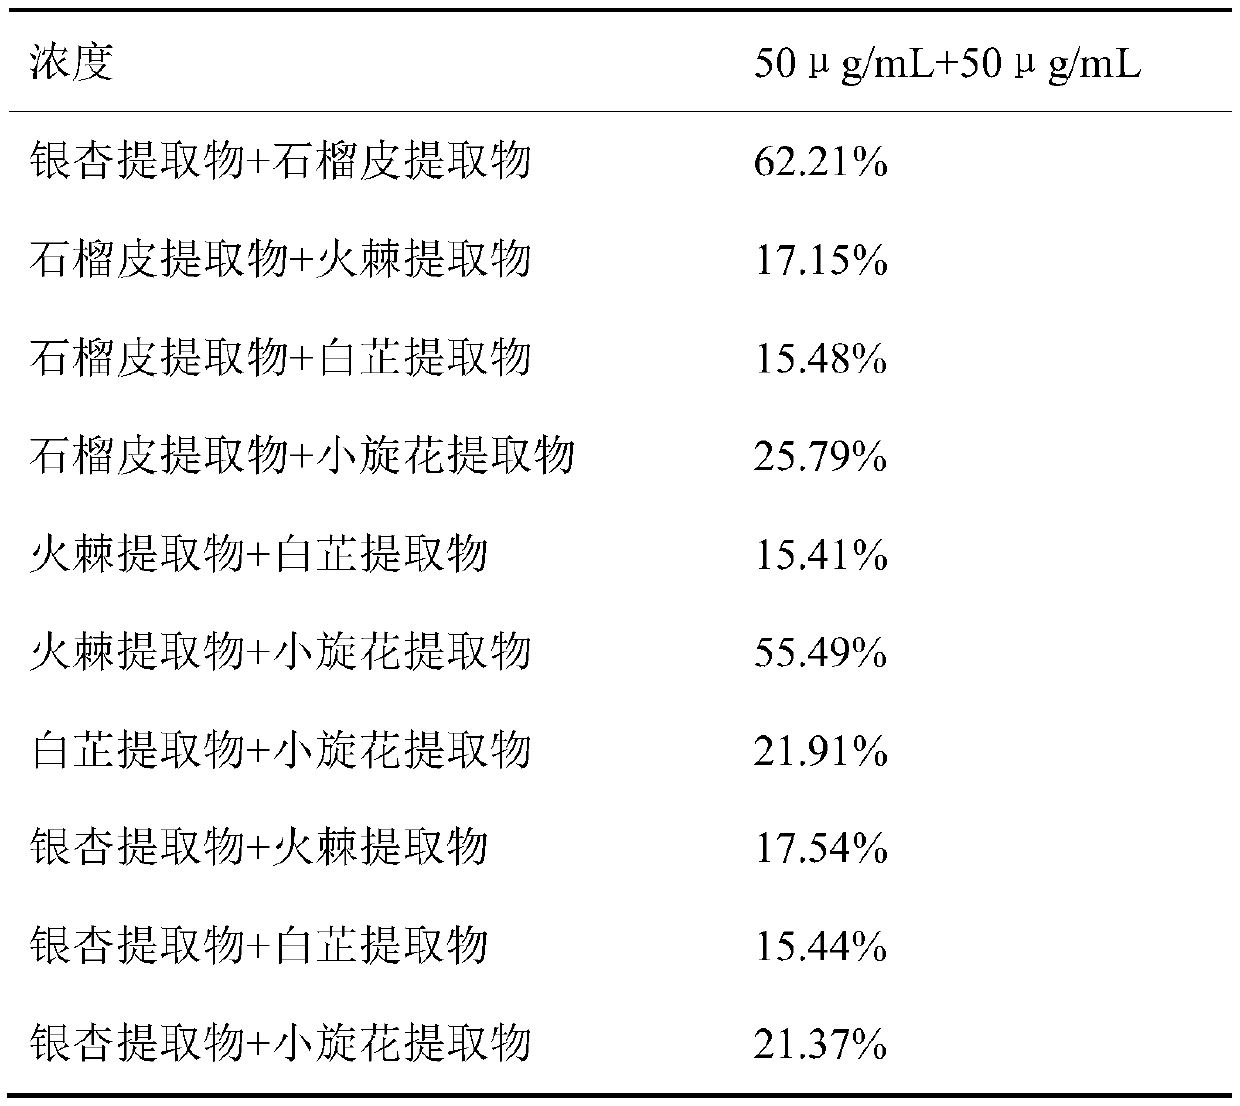 Plant extract inhibiting tyrosinase activity and application of plant extract